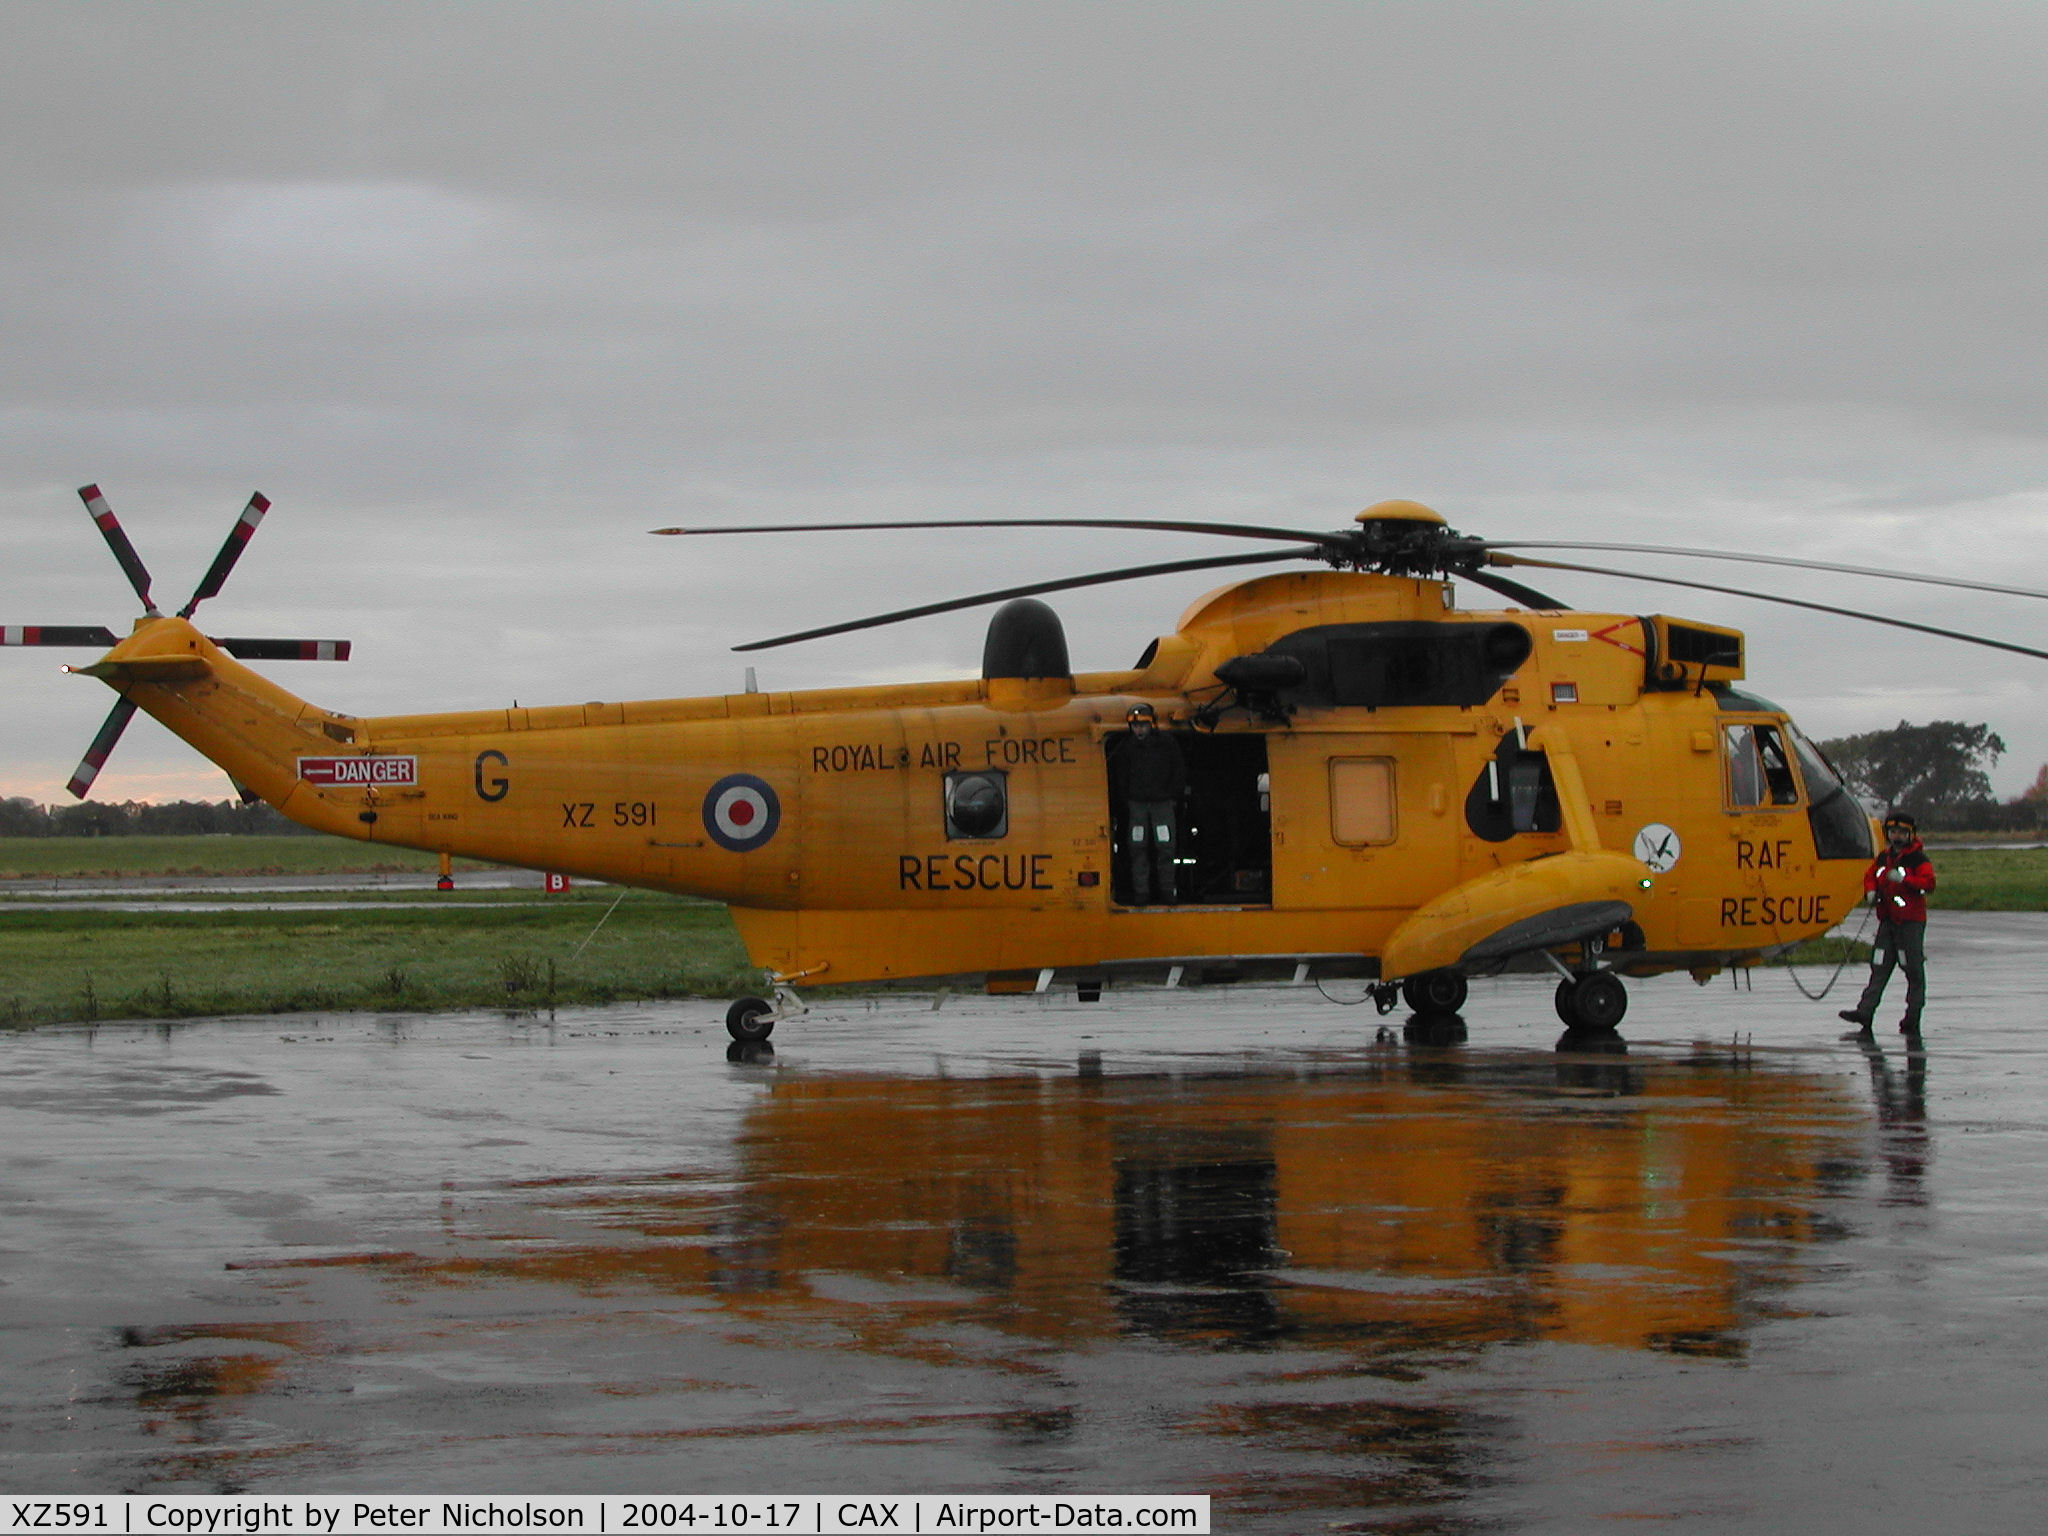 XZ591, 1978 Westland Sea King HAR.3 C/N WA857, Sea King HAR.3, callsign Rescue 128, of 202 Squadron at RAF Boulmer on a visit to Carlisle in October 2004.